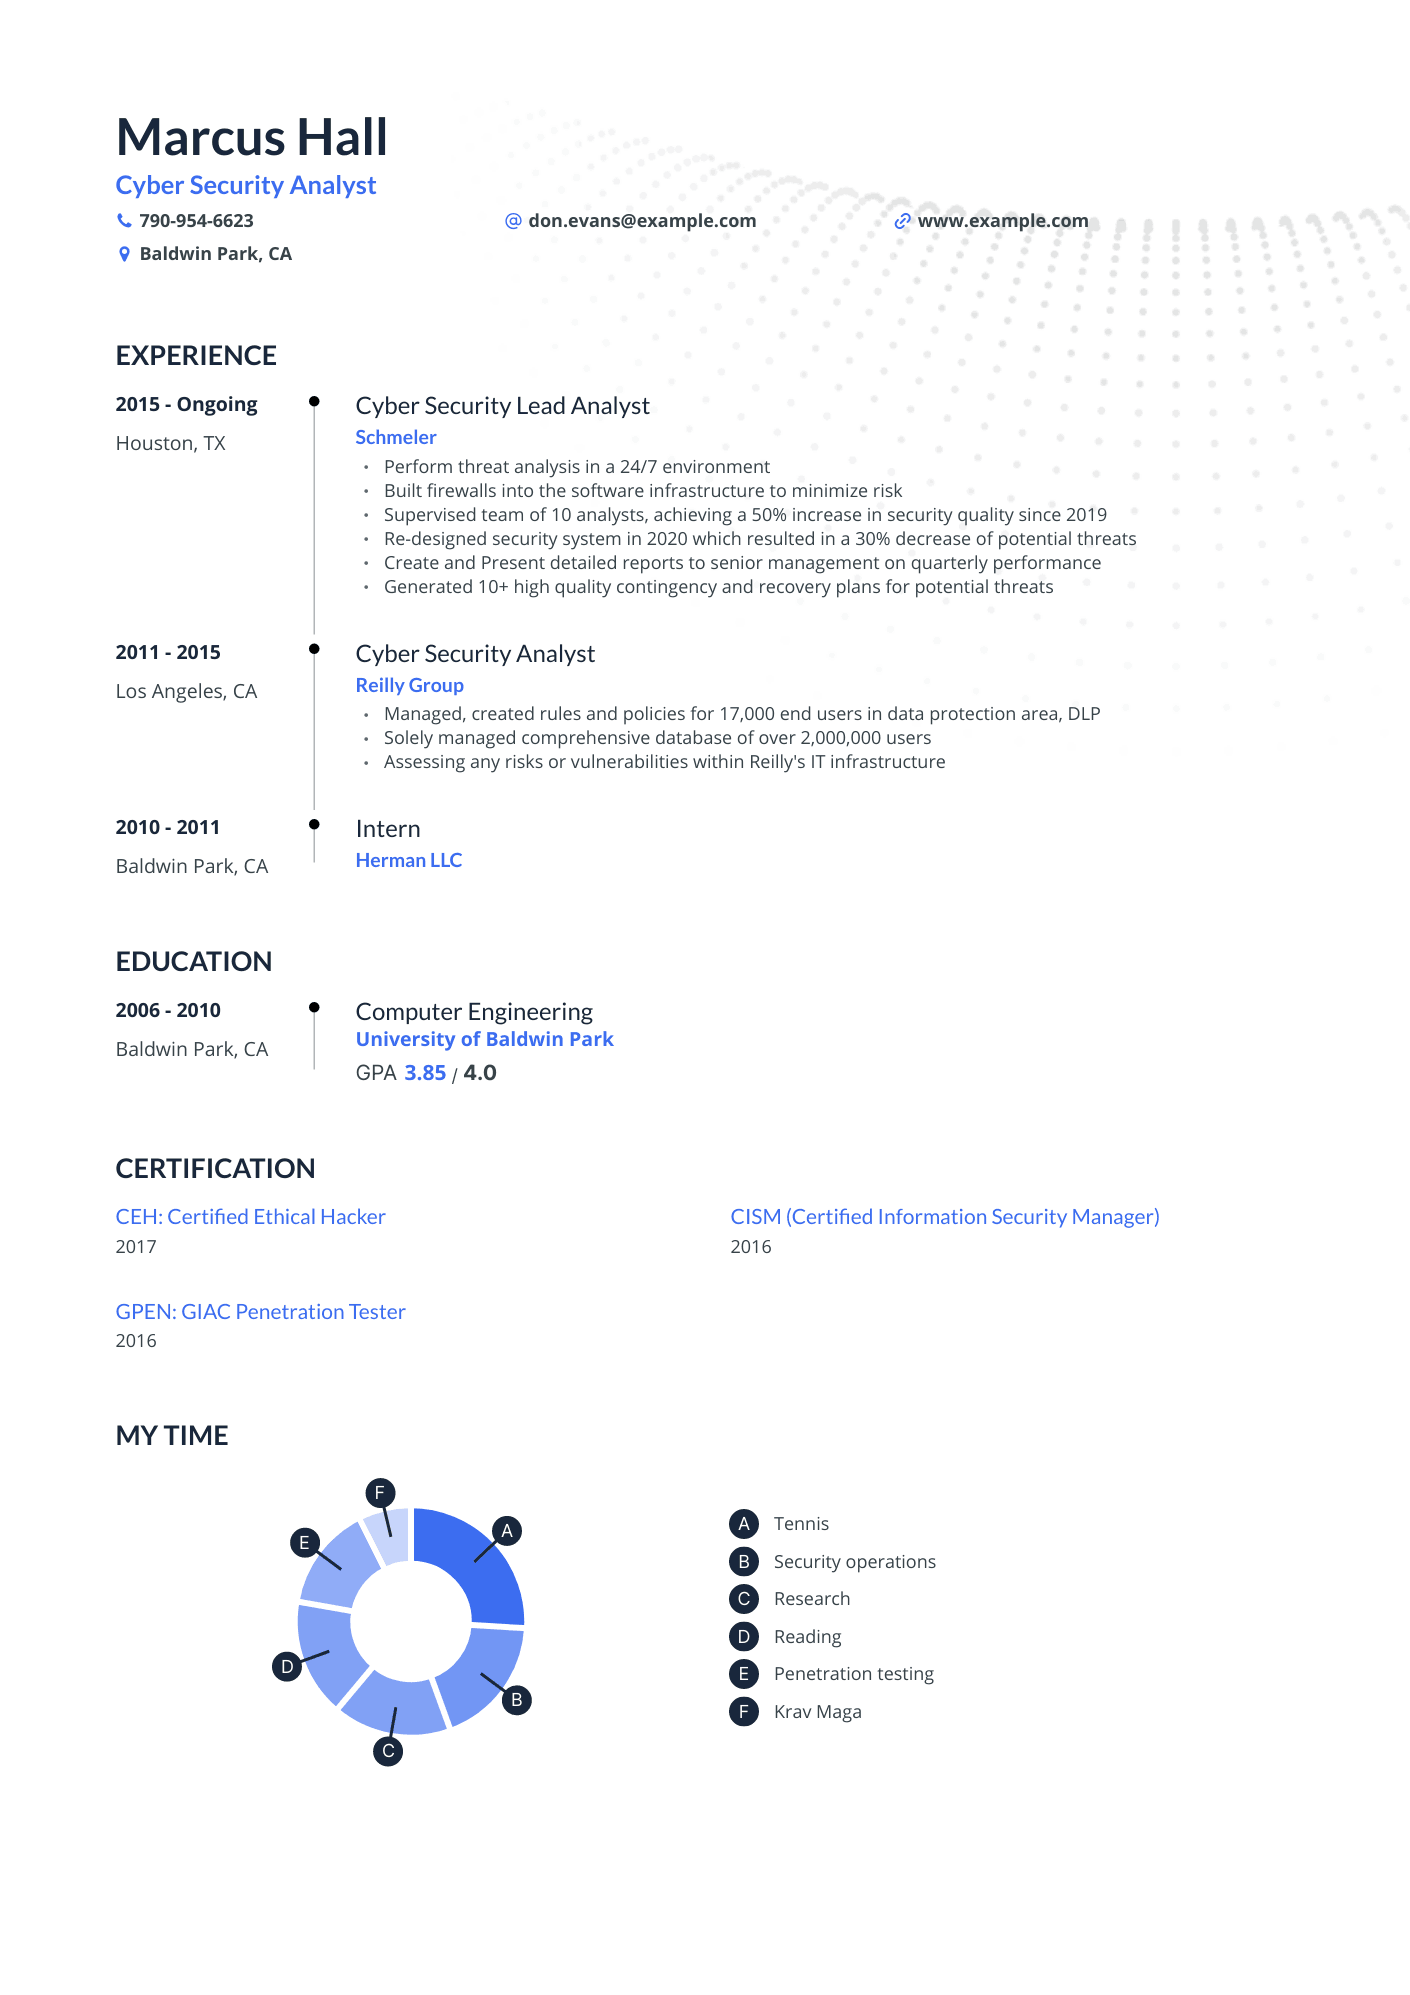 Timeline Cyber Security Analyst Resume Template